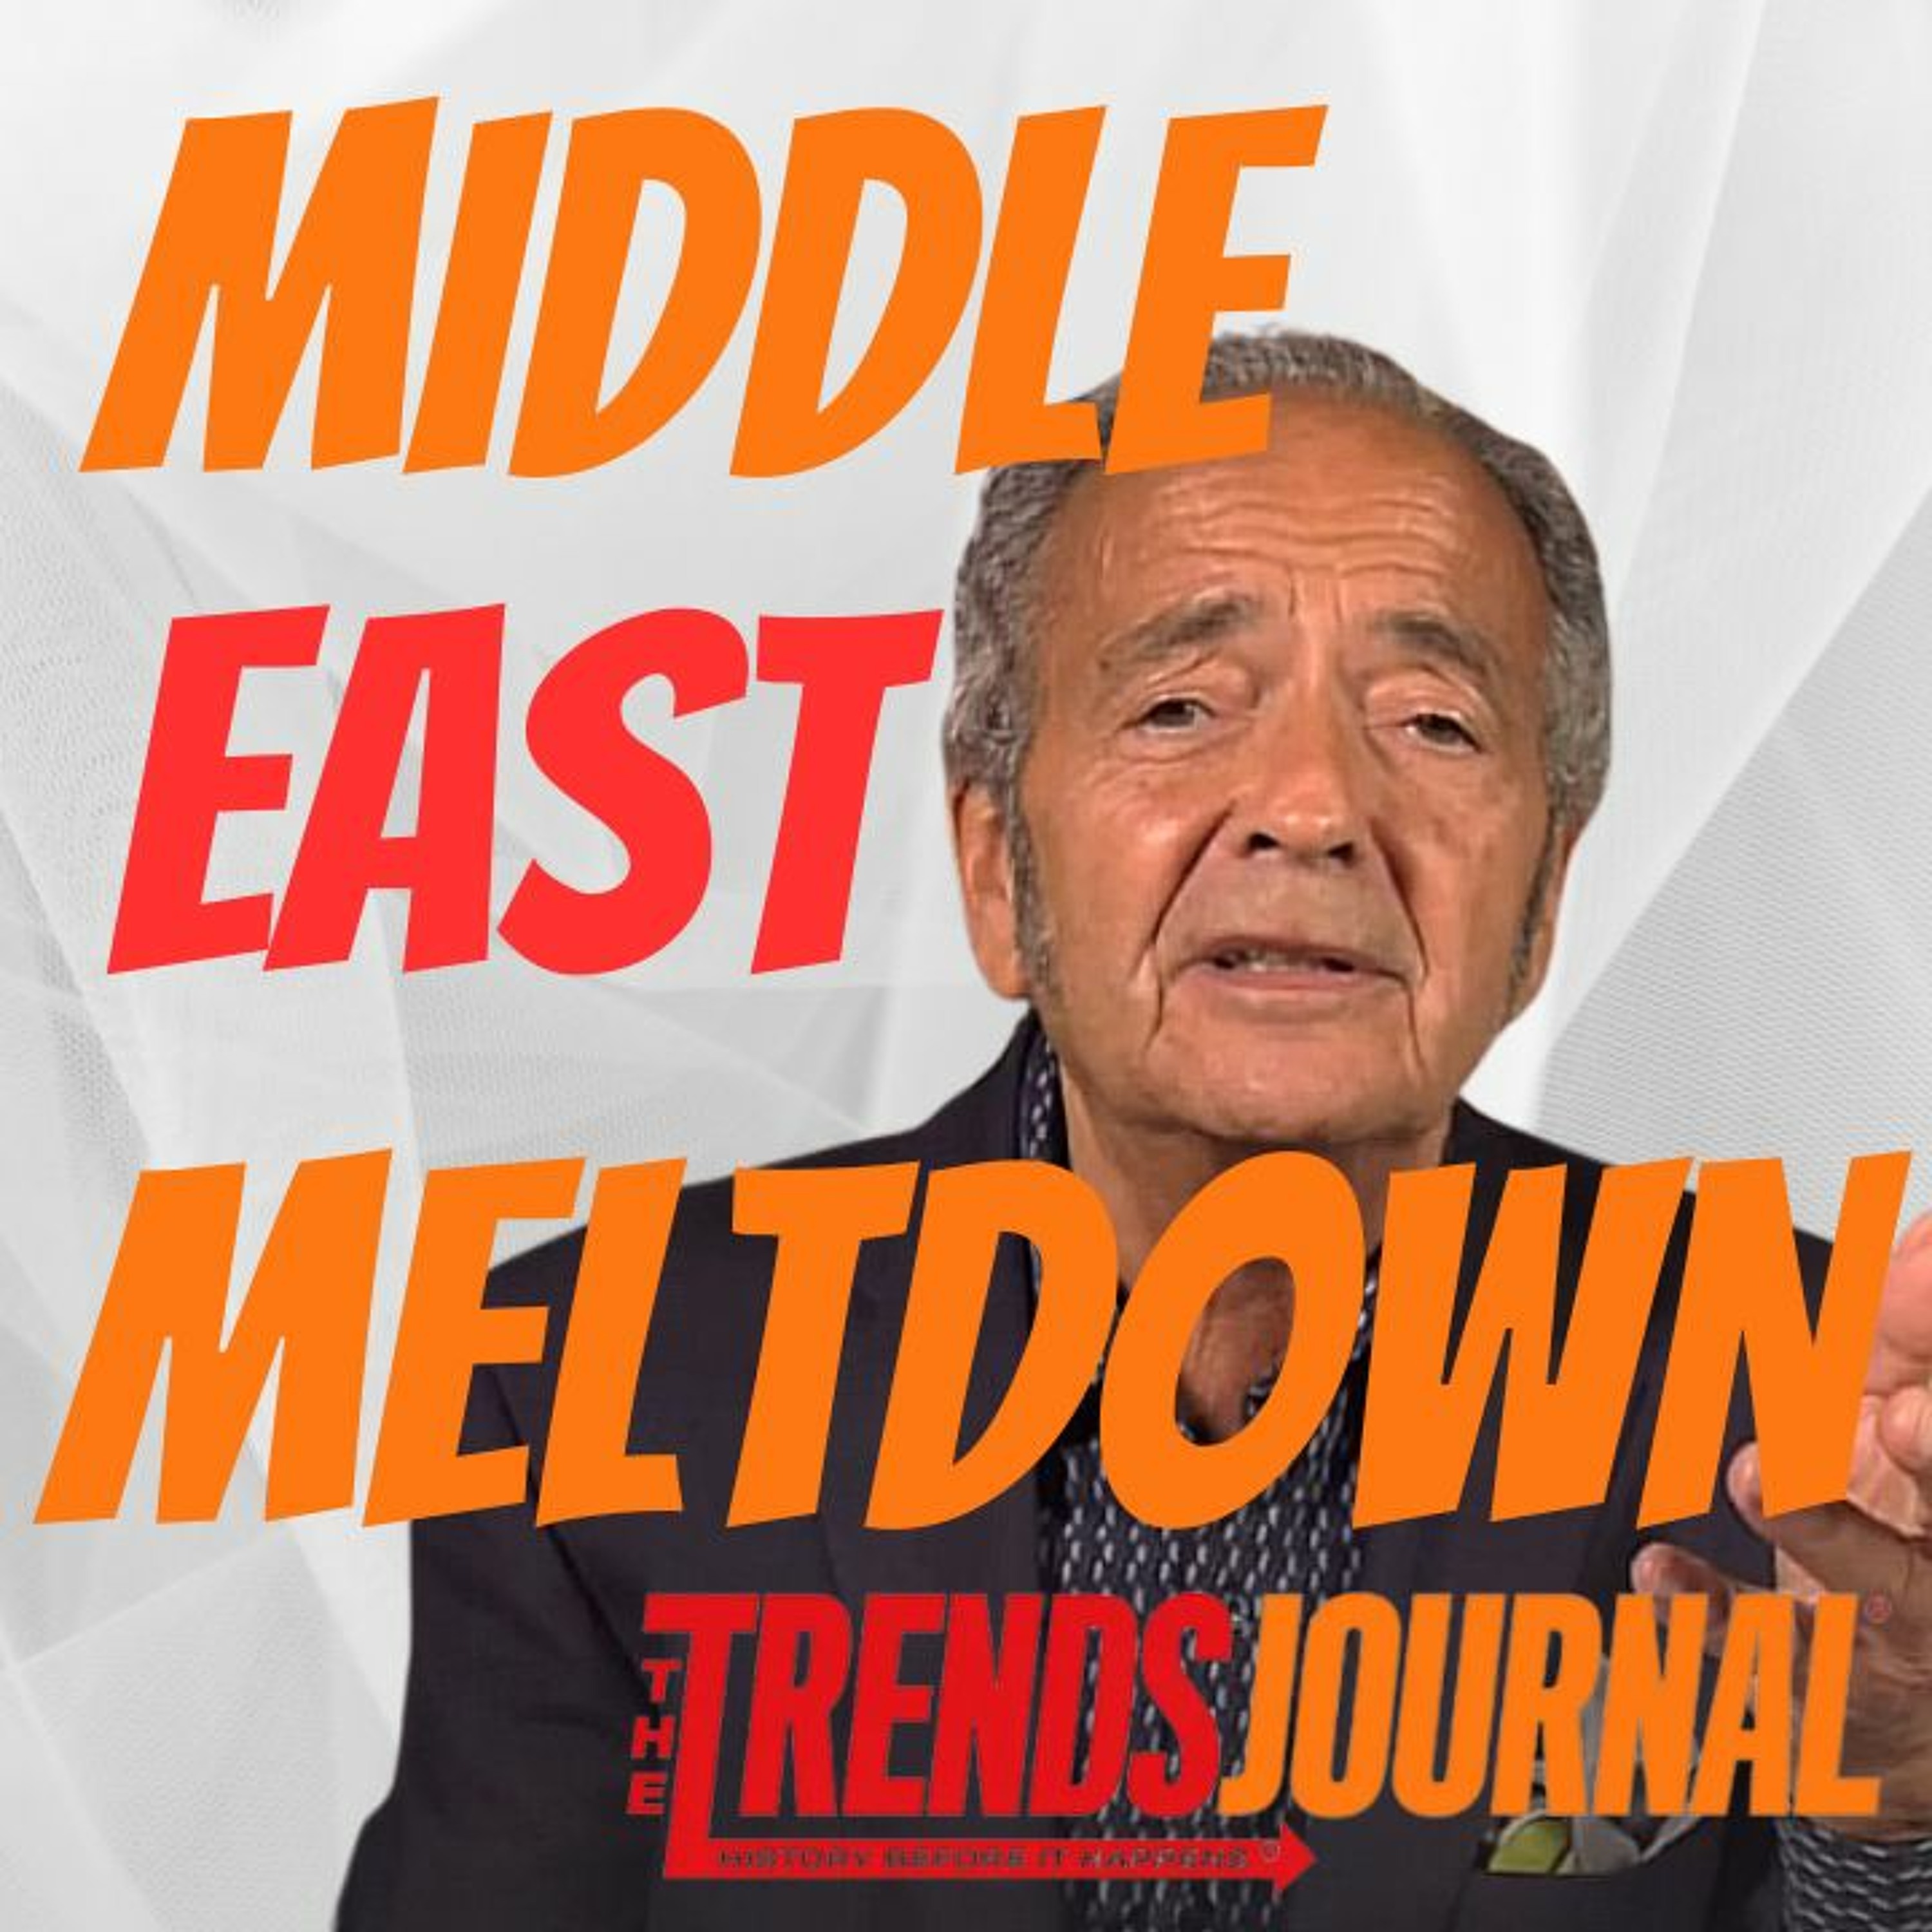 MIDDLE EAST MELTDOWN, WHEN ALL ELSE FAILS THEY TAKE YOU TO WAR